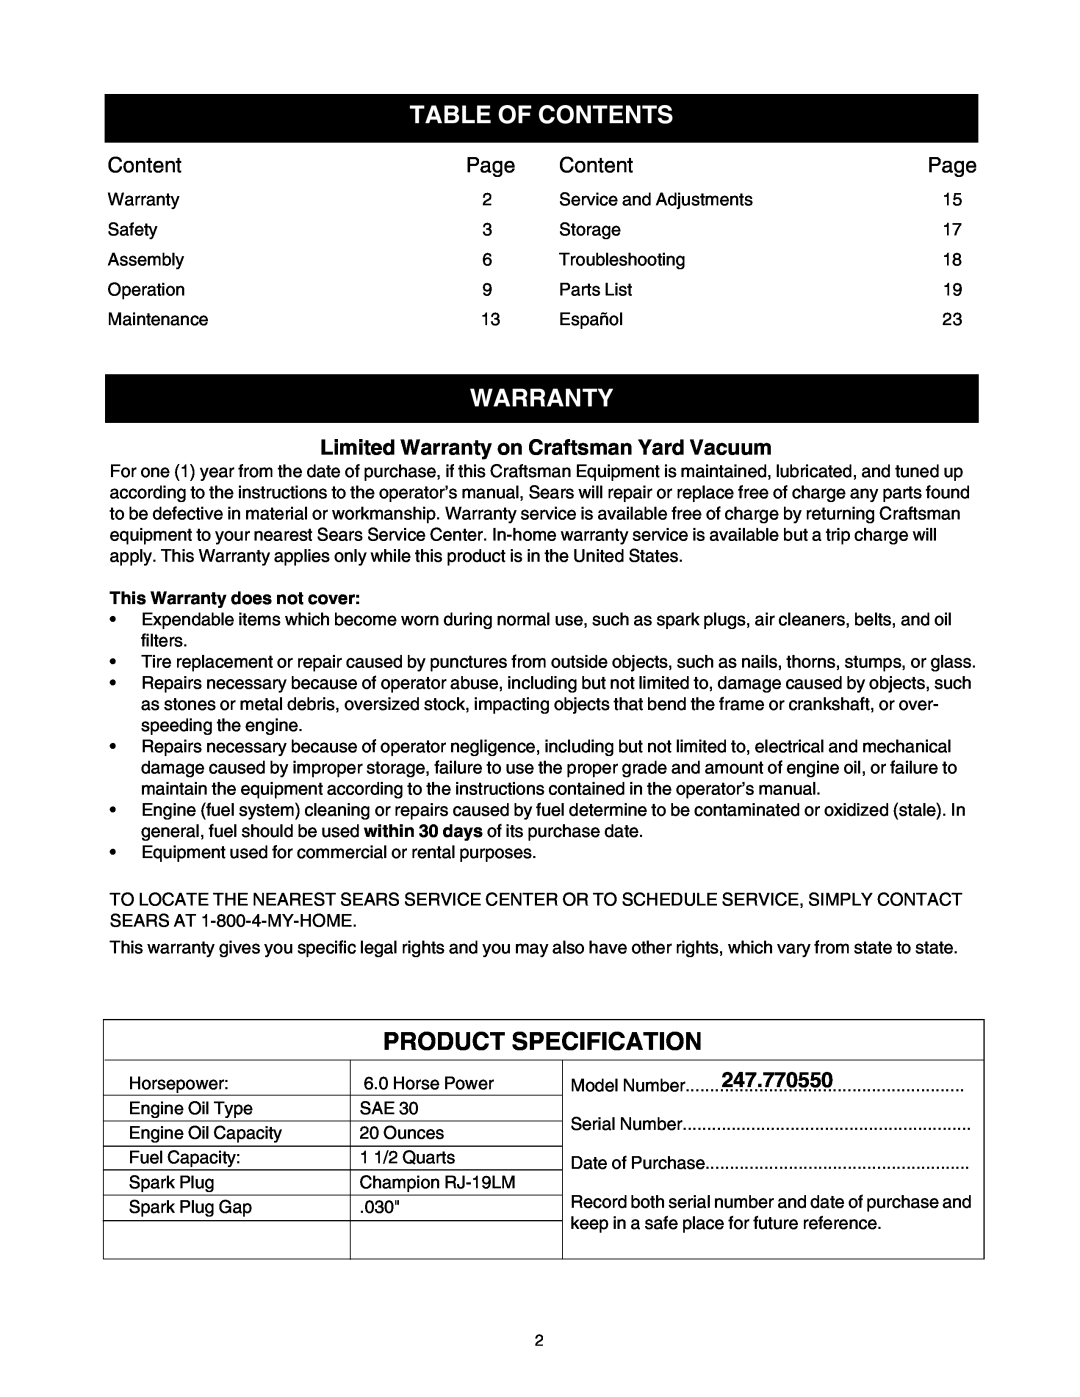 Sears Table Of Contents, Product Specification, Page, Limited Warranty on Craftsman Yard Vacuum, 247.770550 